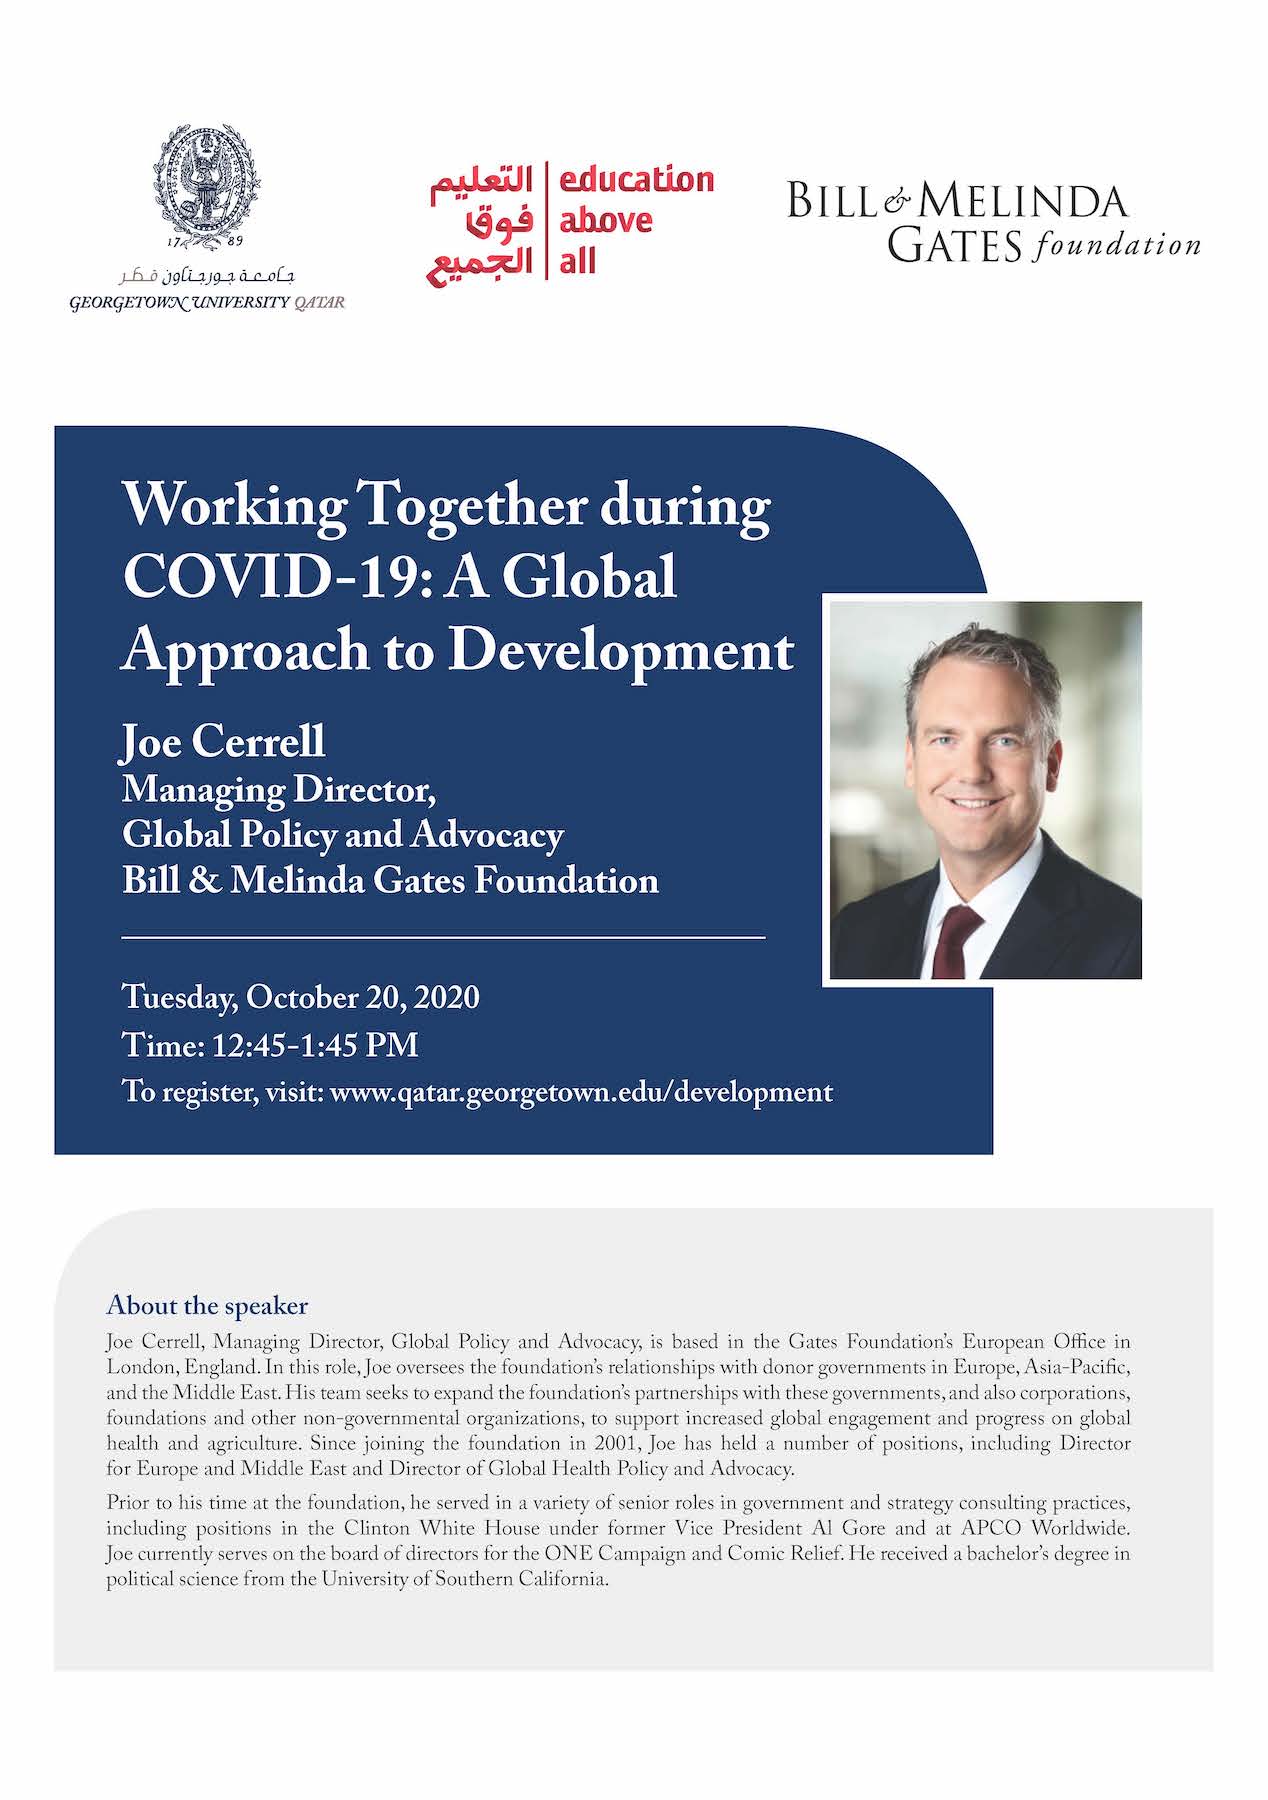 Working Together During COVID-19: A Global Approach to Development